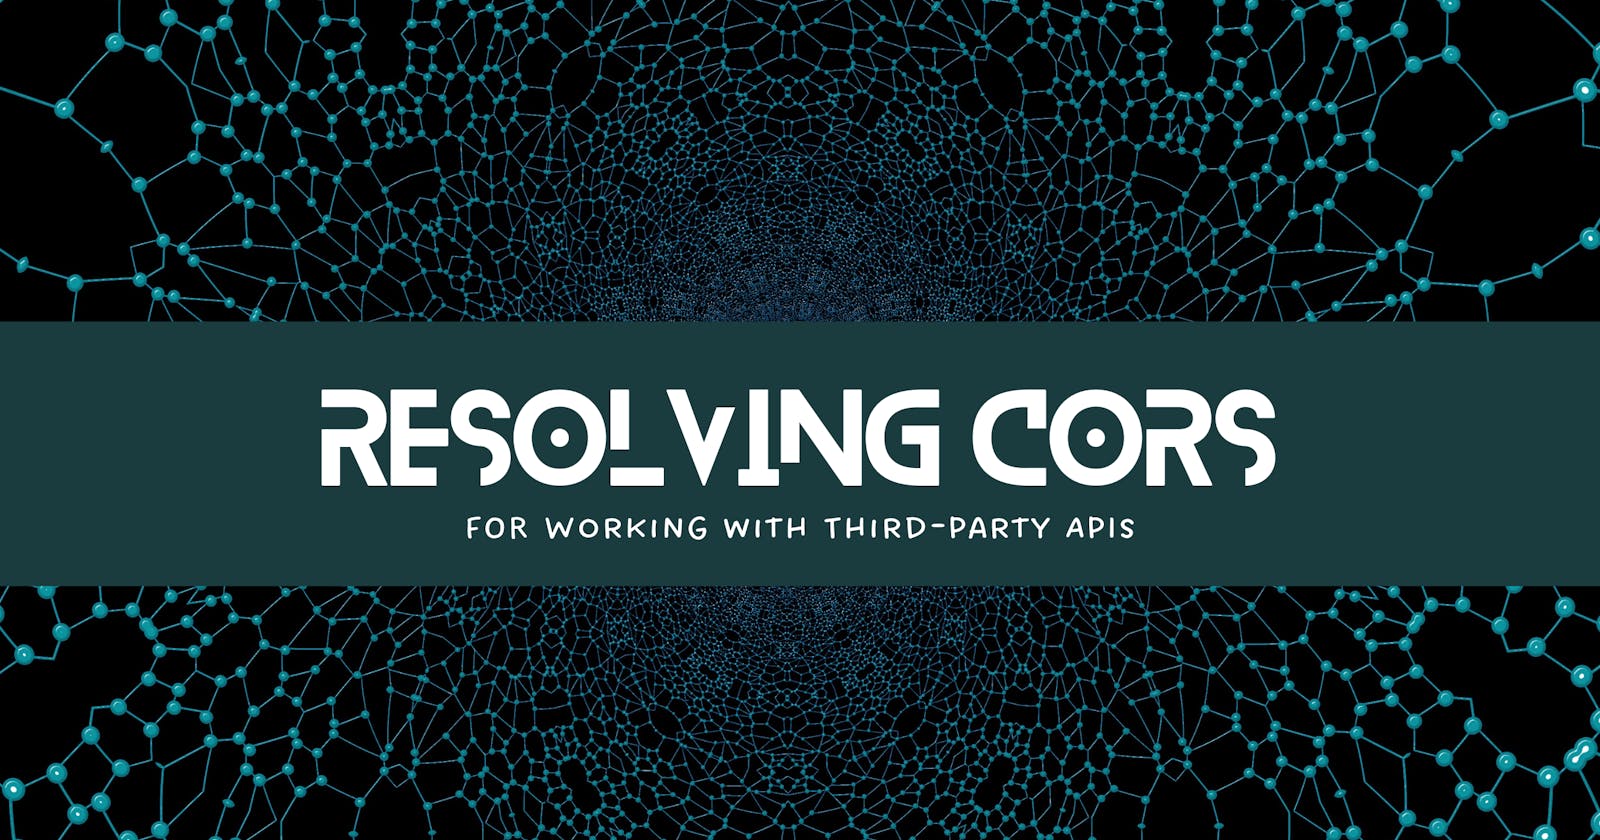 Resolving CORS Restriction using Node.js: A Guide for Working with Third-Party APIs